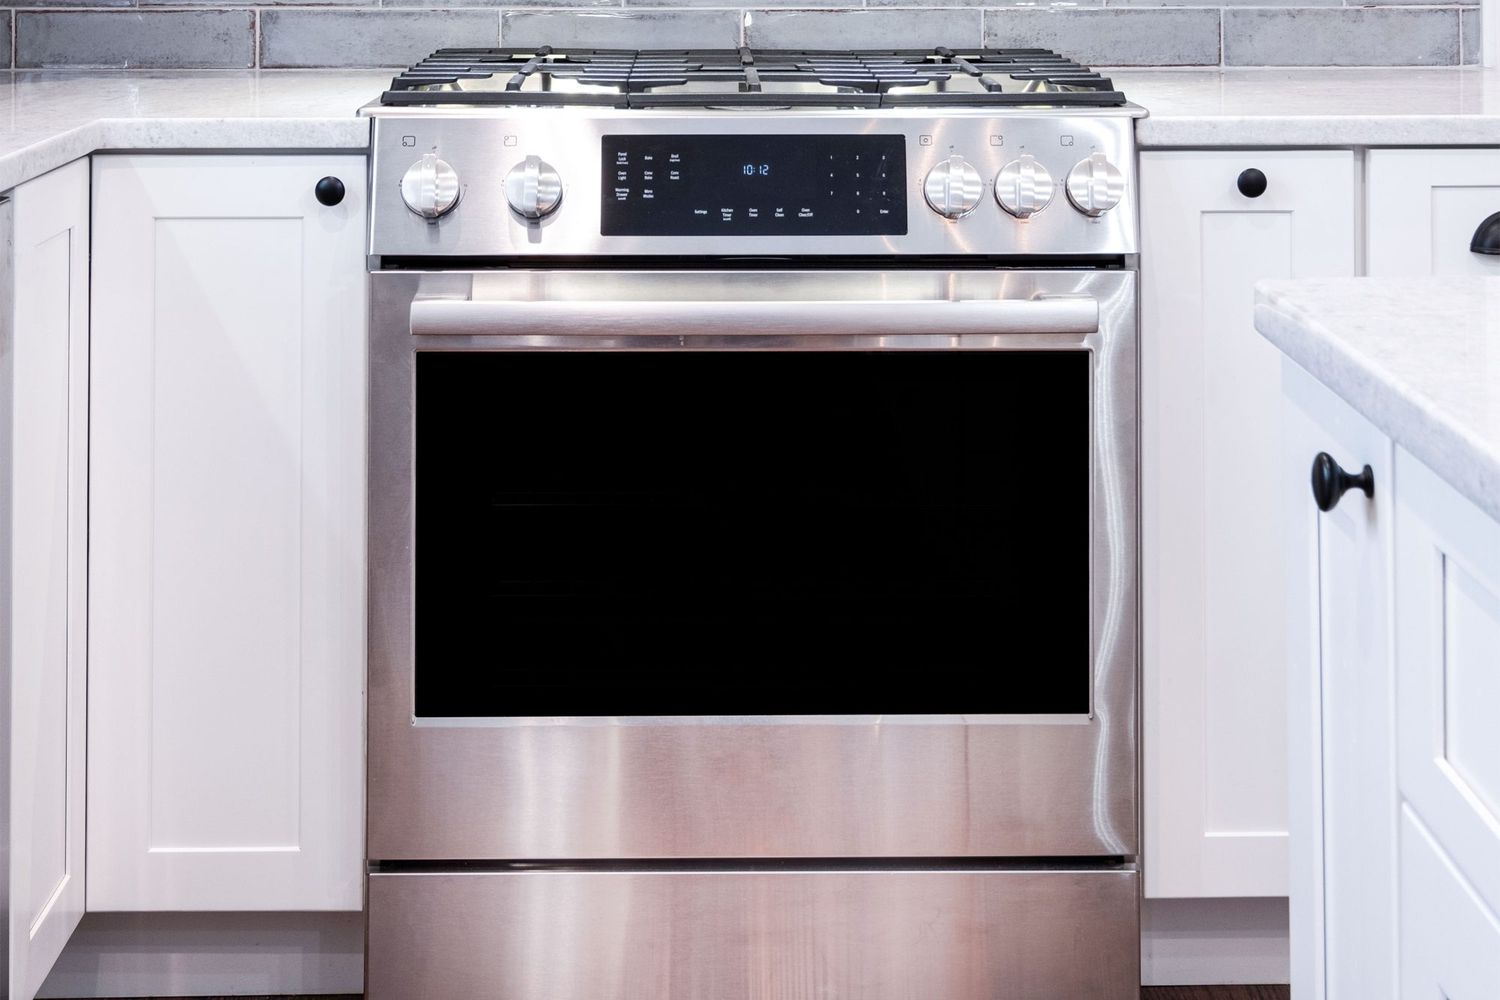 Stainless steel stove/oven